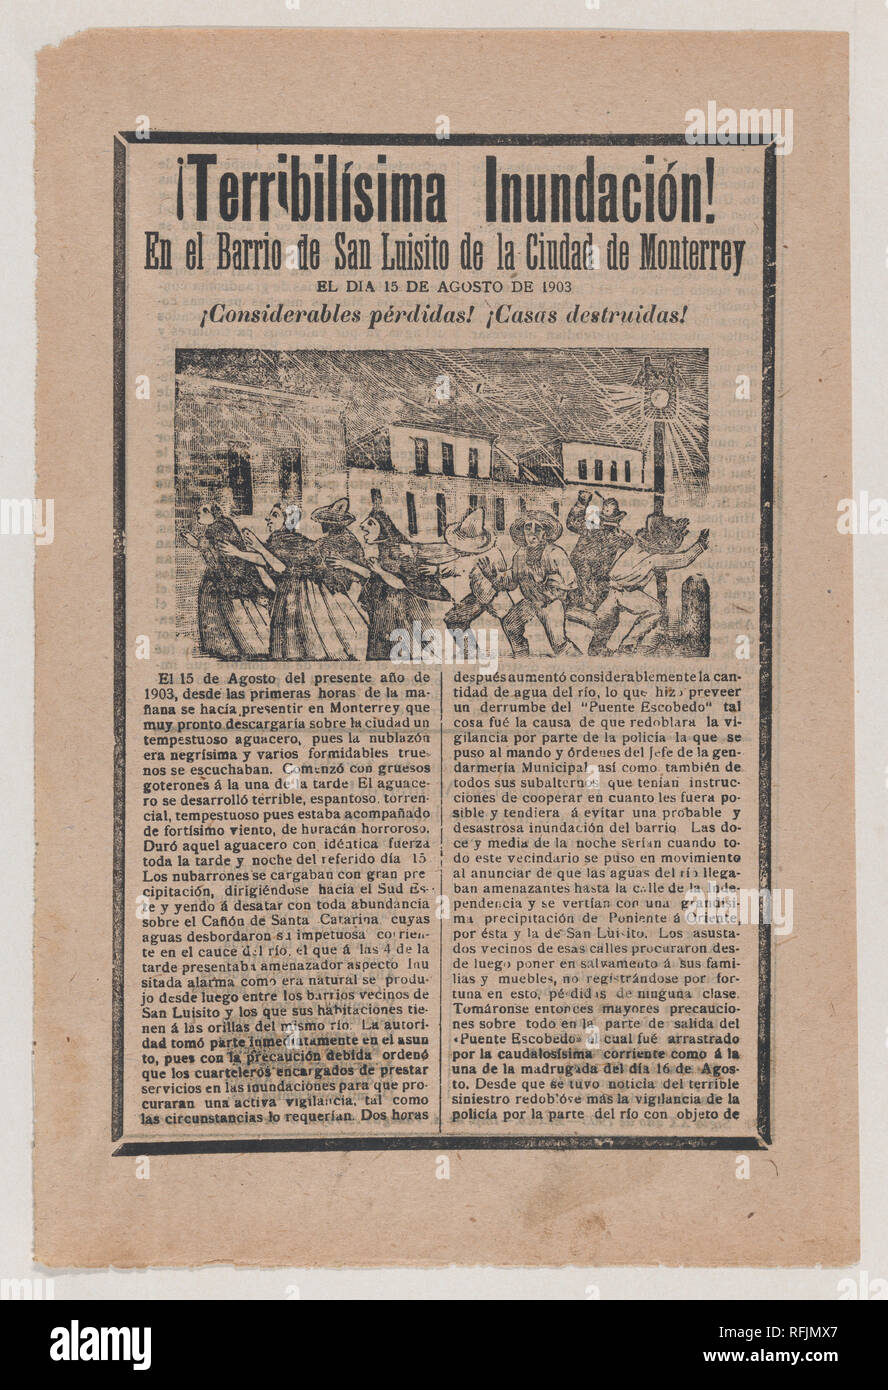 Broadsheet relating to the terrible flood in the barrio of San Luisito in the city of Monterrey on 15 August 1903, a description in the bottom section. Artist: José Guadalupe Posada (Mexican, 1851-1913). Dimensions: Sheet: 12 in. × 7 15/16 in. (30.5 × 20.2 cm). Publisher: Antonio Vanegas Arroyo (1850-1917, Mexican). Date: 1903. Museum: Metropolitan Museum of Art, New York, USA. Stock Photo